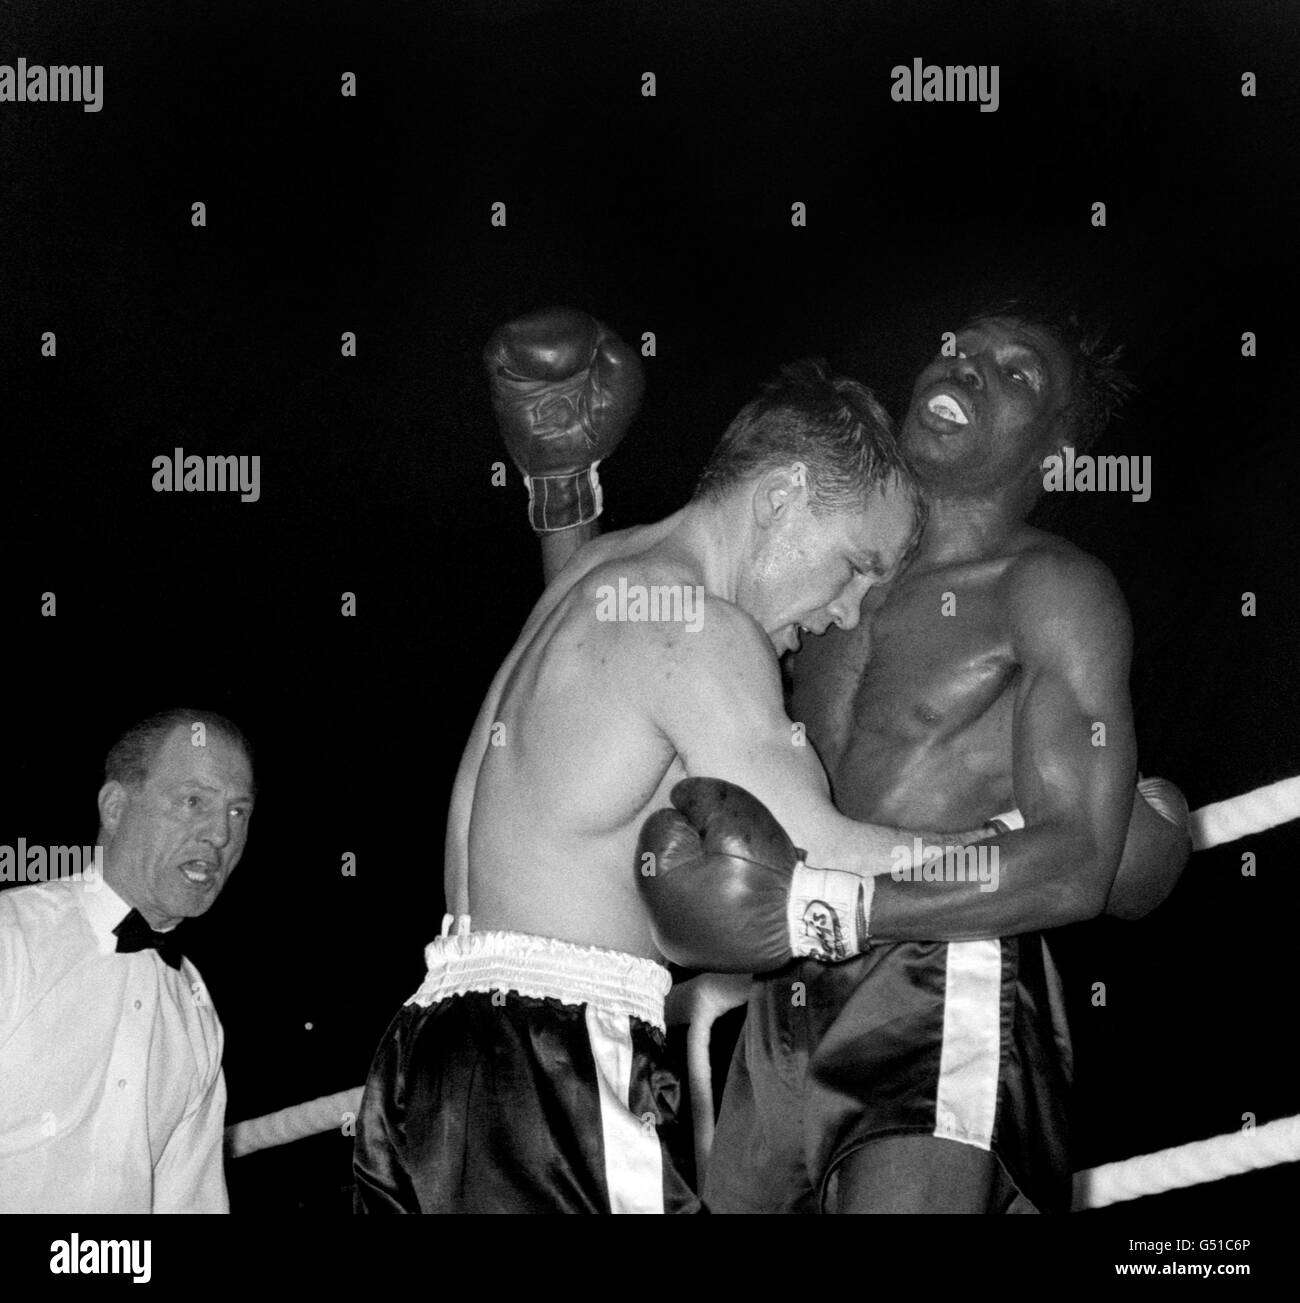 British challenger Dave Charnley (l) pins his American opponent Joe Brown against the ropes, watched by referee Tommy Little, during the their fight. Joe Brown went on to win on points after 15 rounds. The fight was voted 1961 Ring Magazine Fight of the Year. Stock Photo